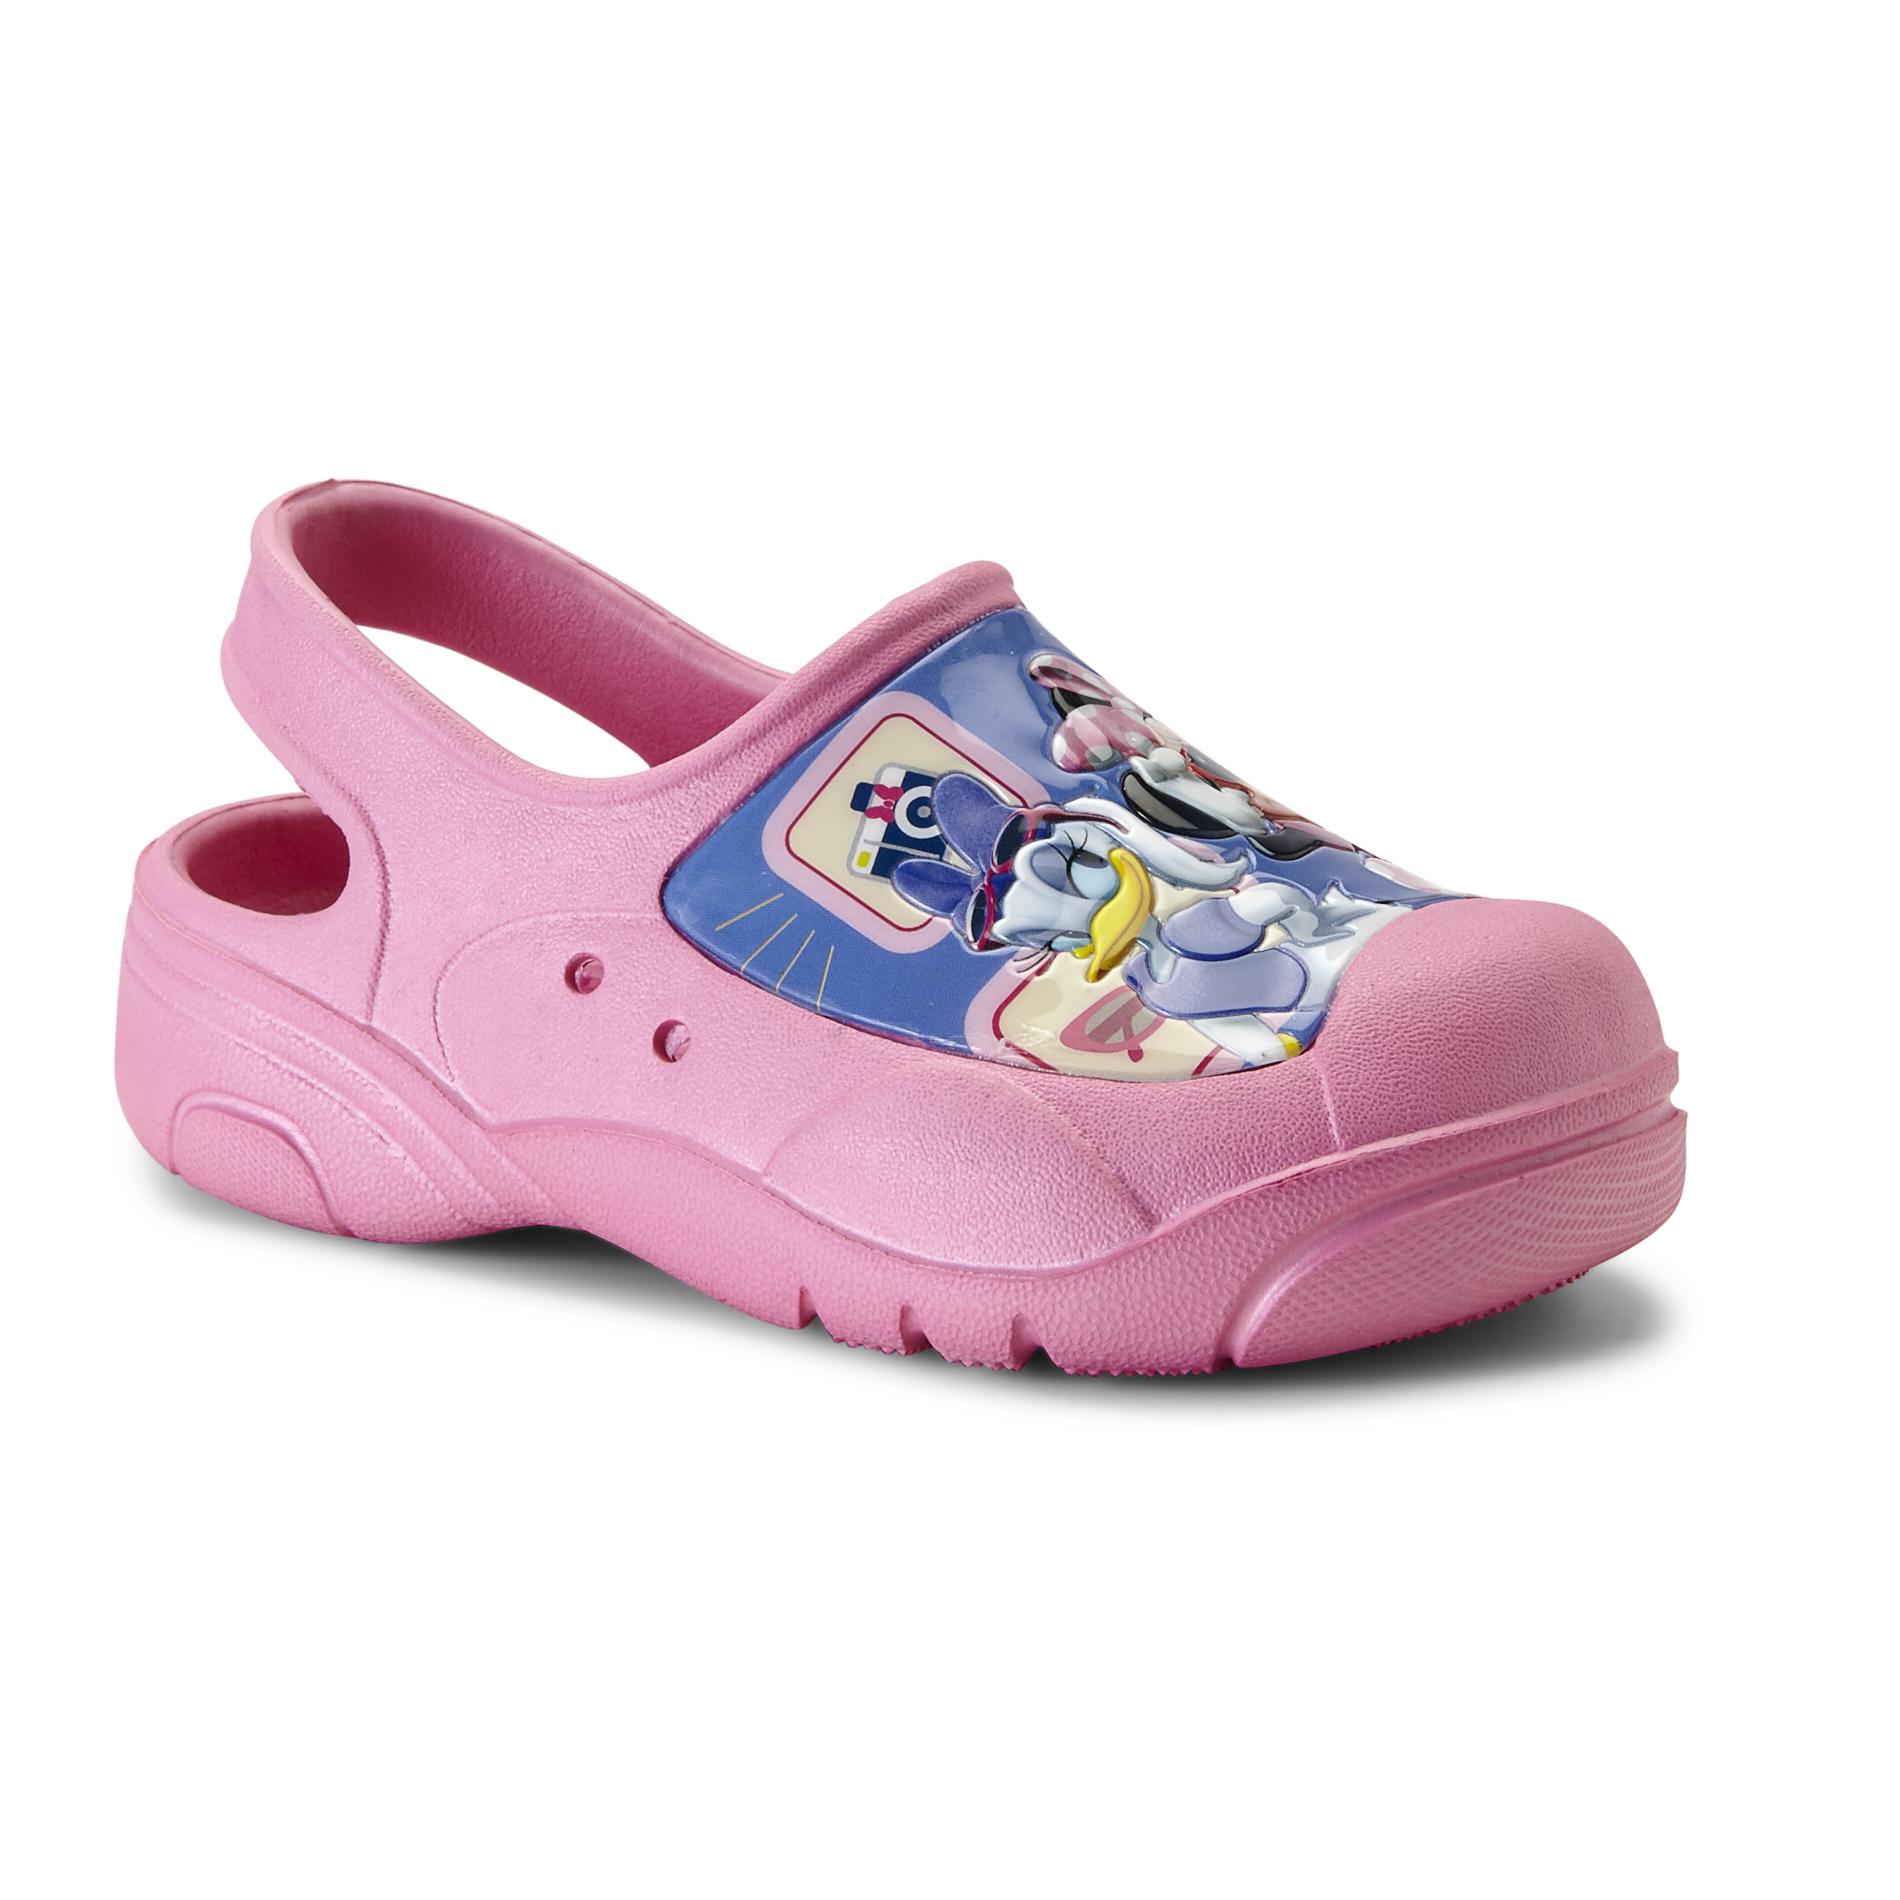 Disney Minnie Mouse & Daisy Duck Toddler Girl's Pink Clog